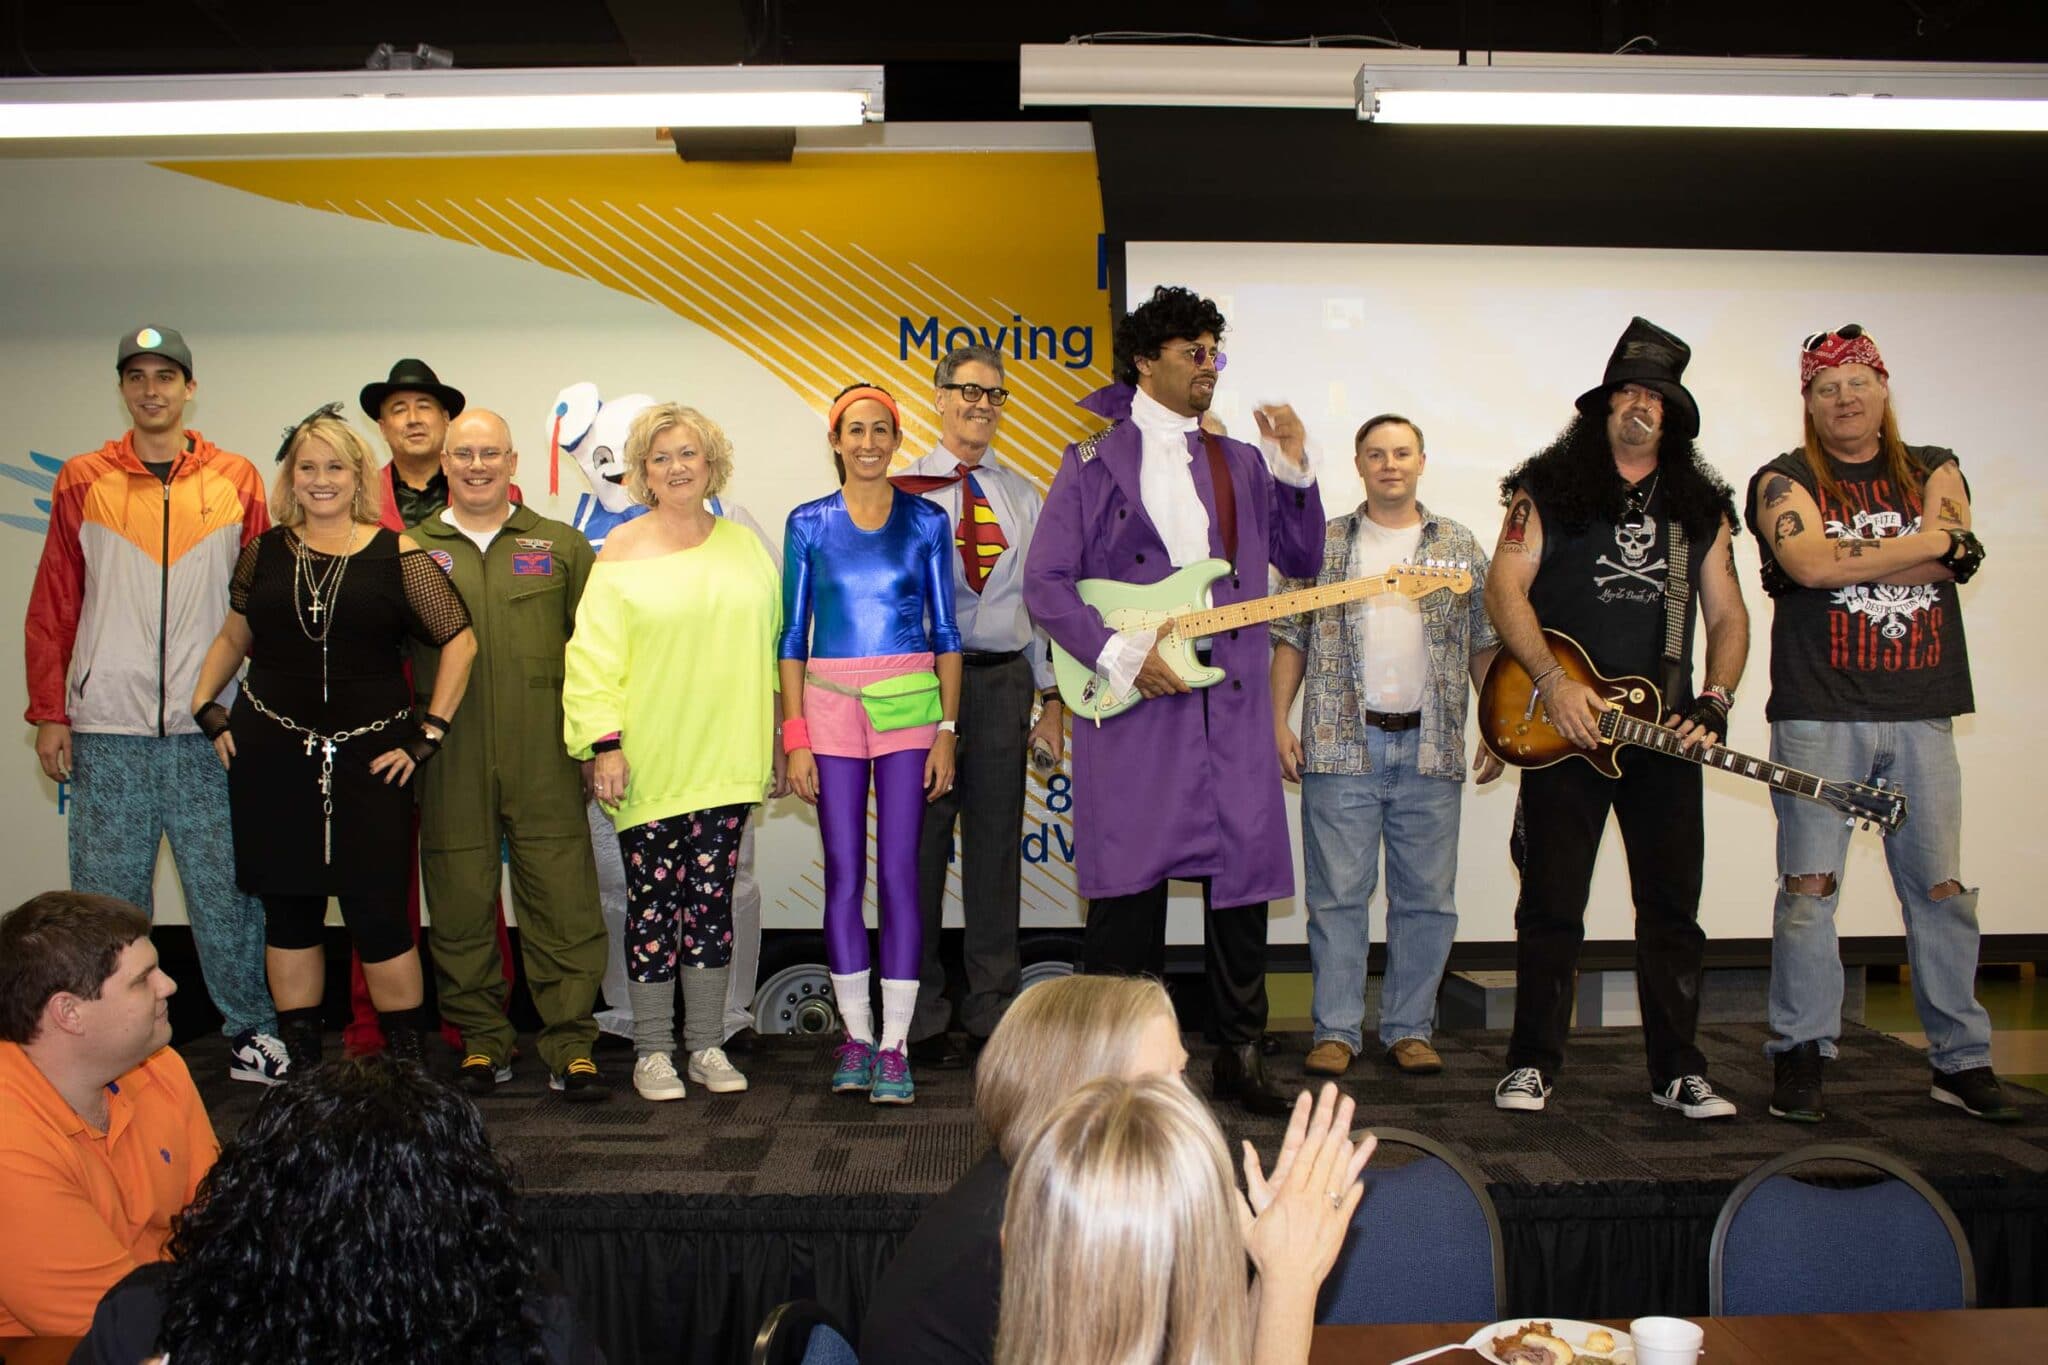 Hilldrup's Senior Management Team dresses in 80s themes costumes for Halloween